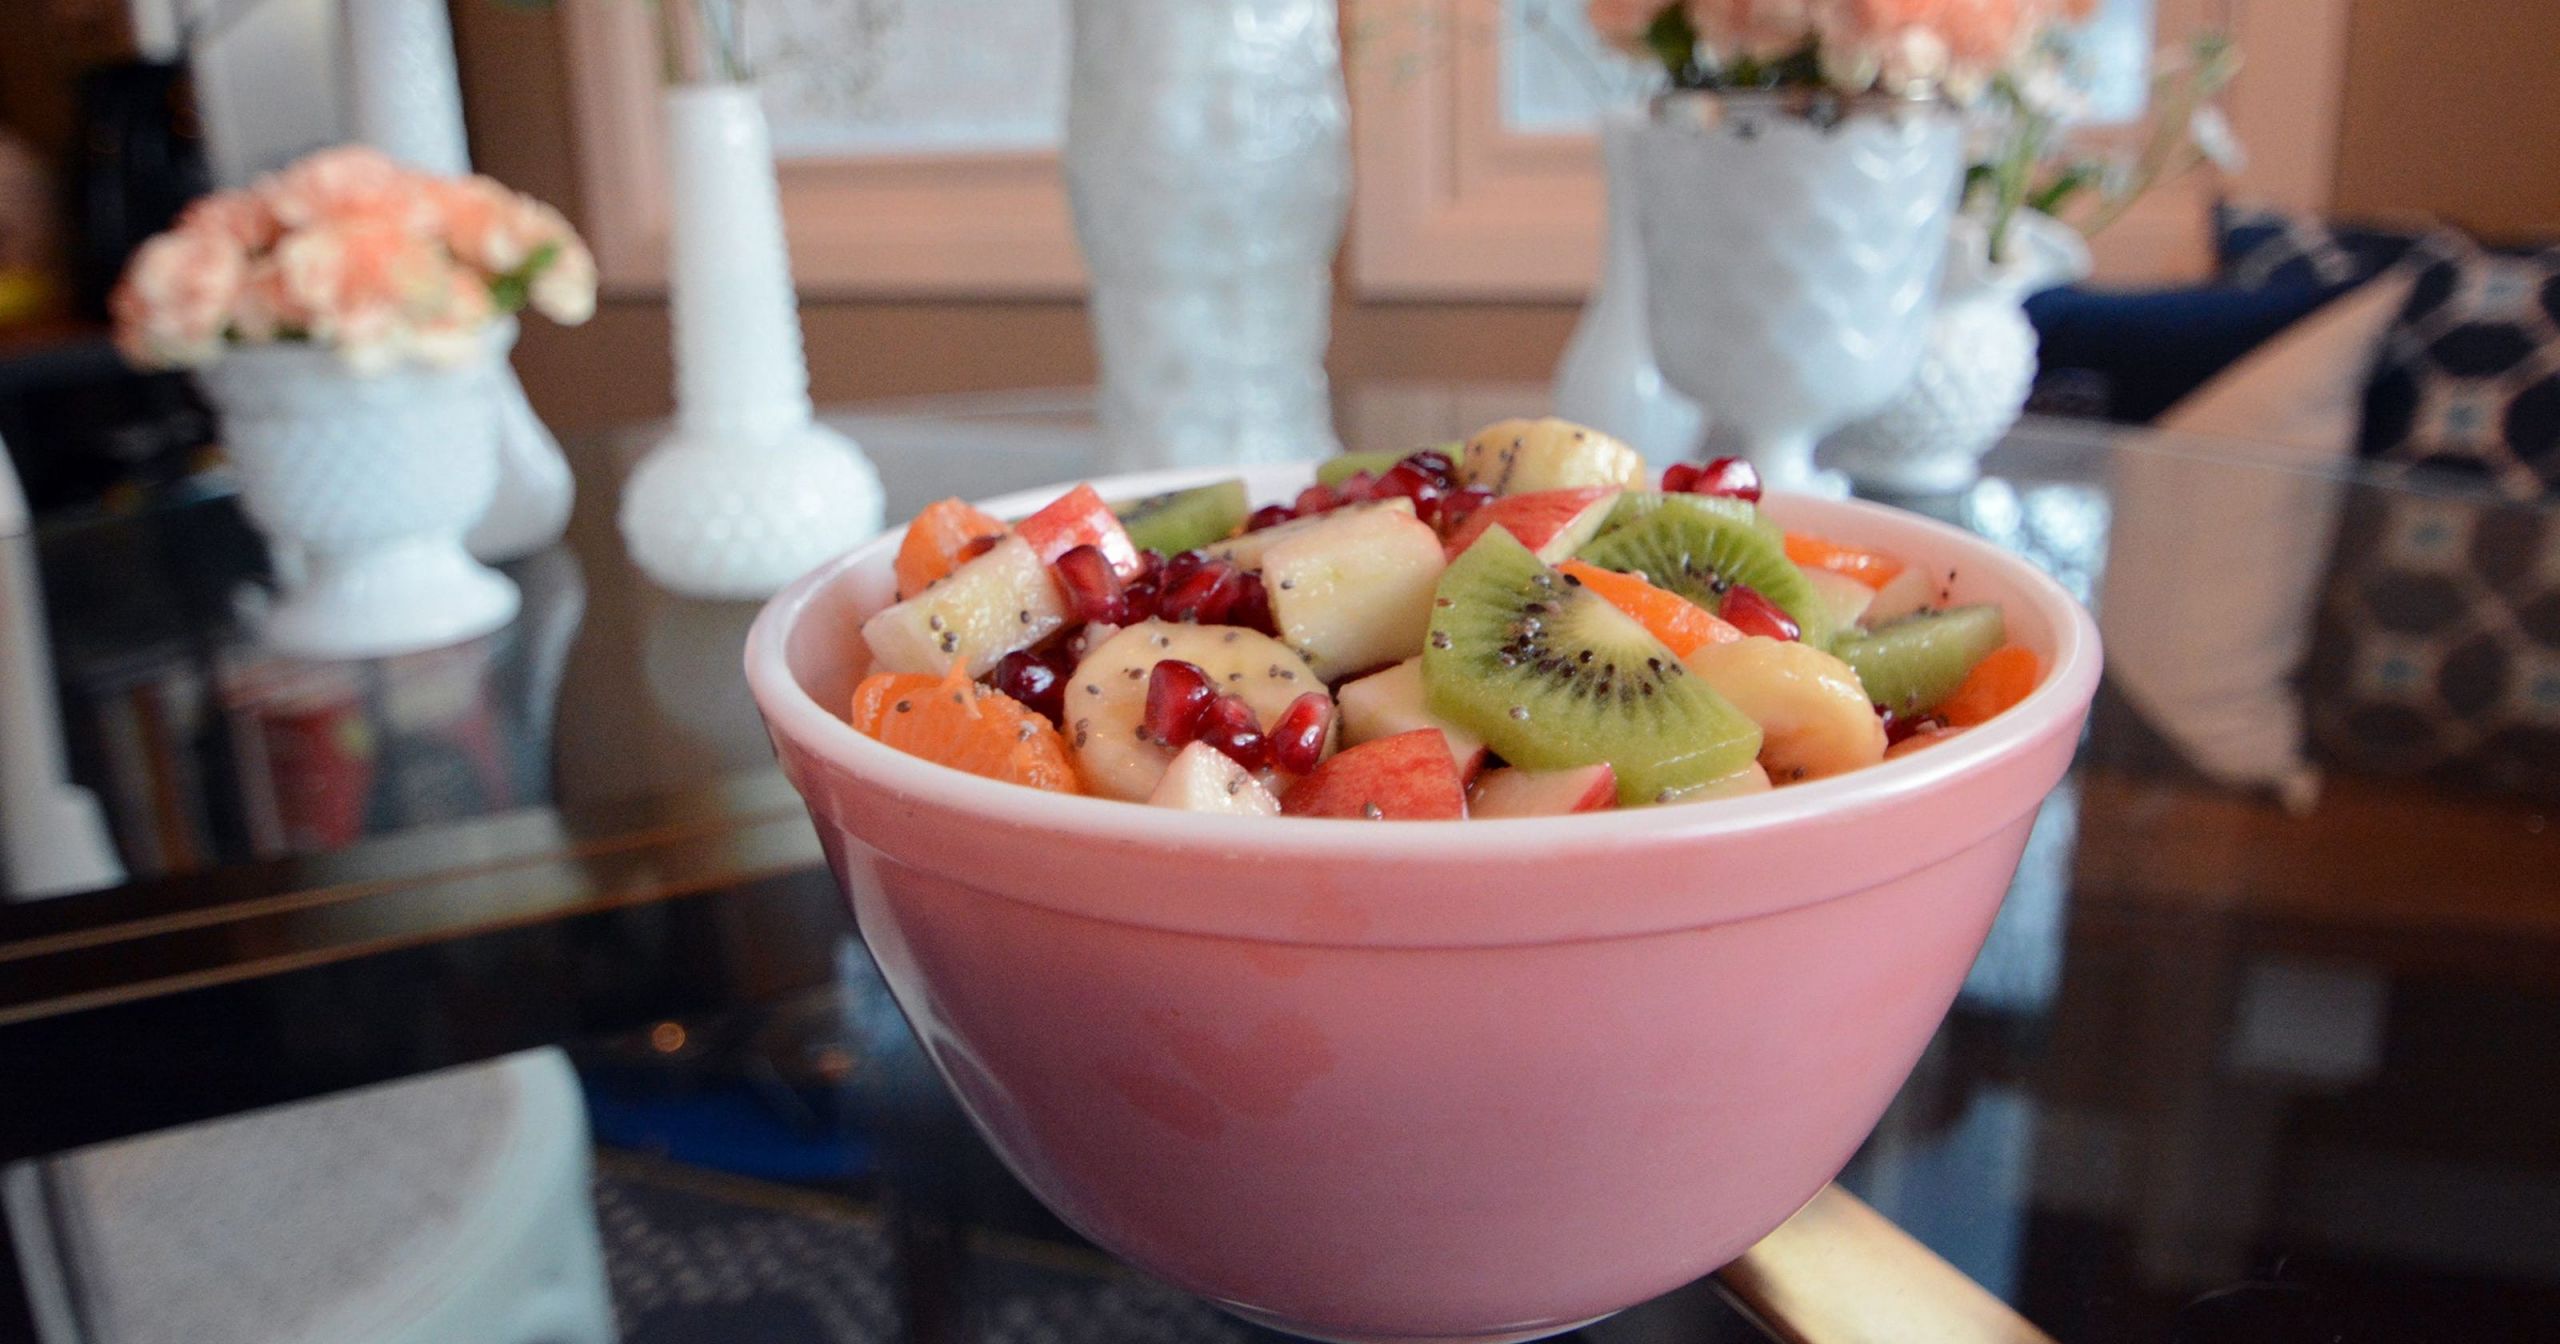 Winter Fruit Salad Ideas
 Winter Fruit Salad with Chia Seed Dressing